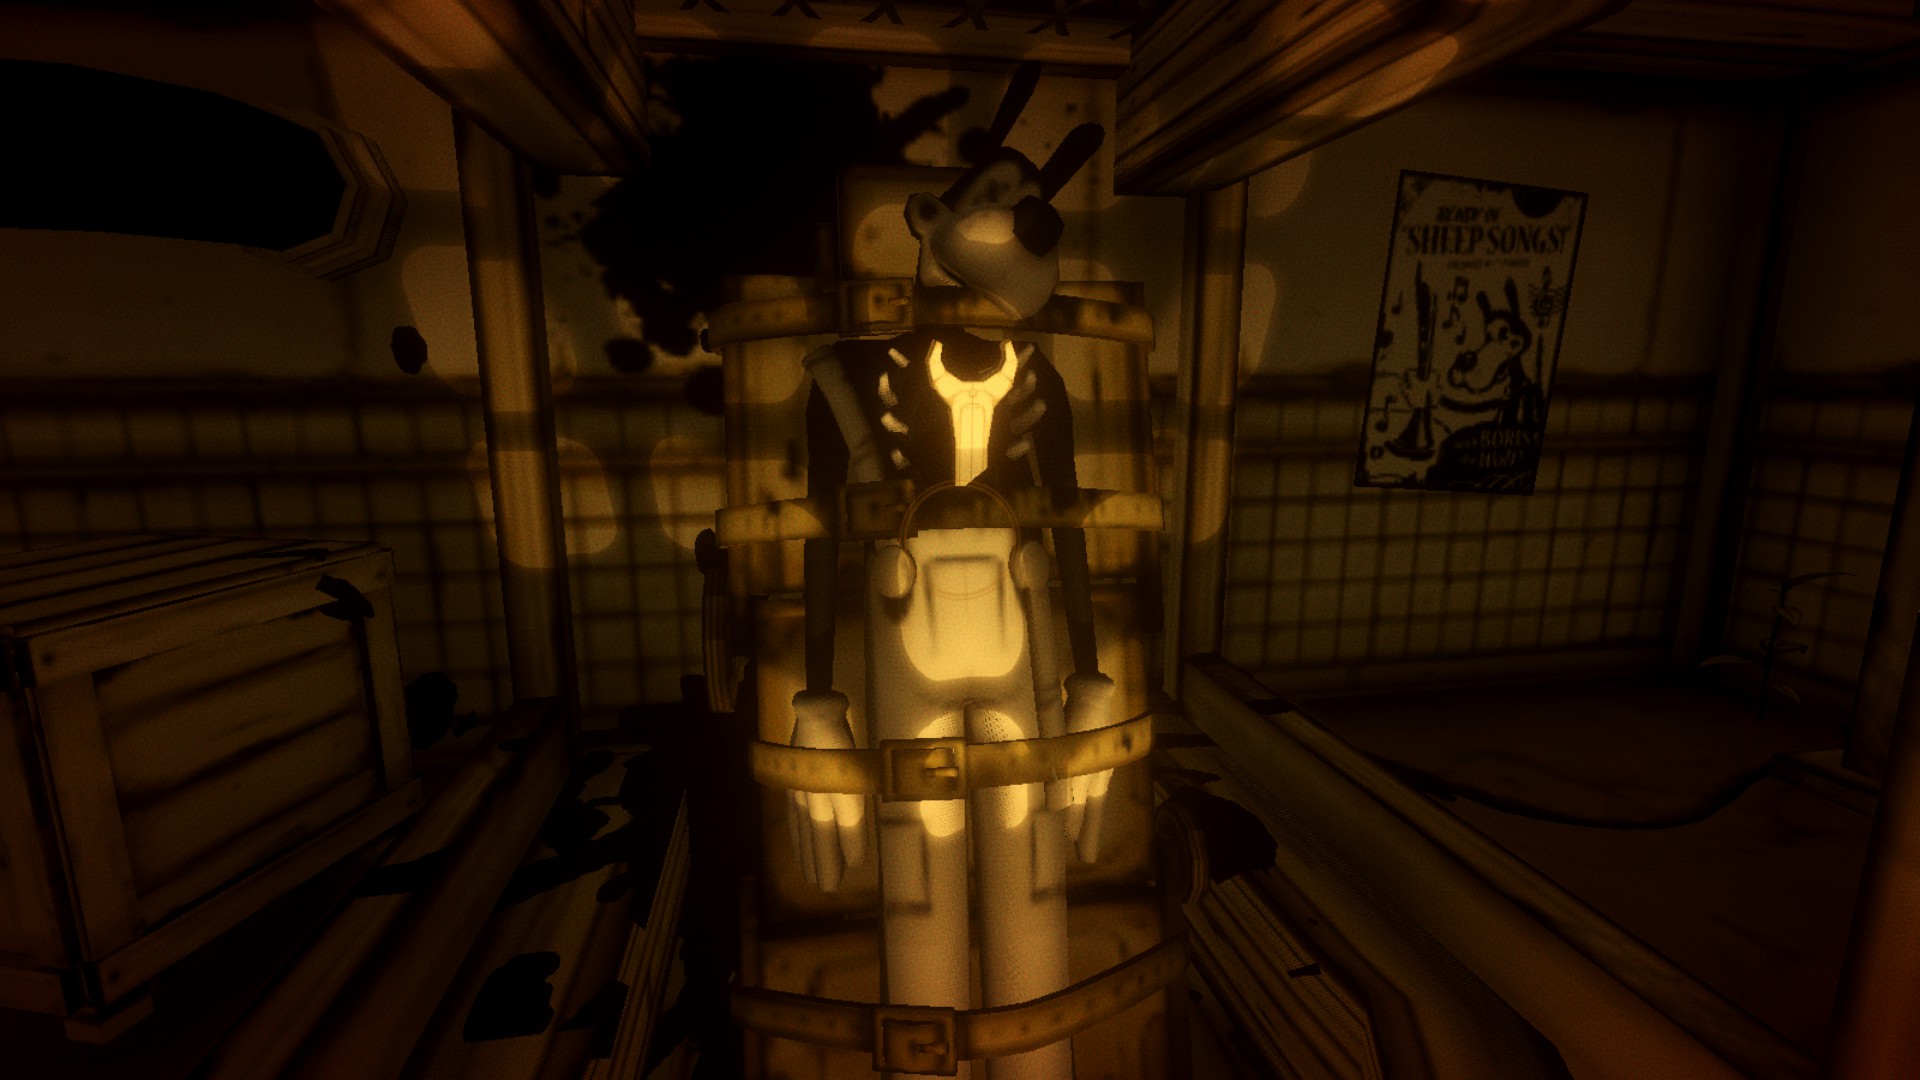 bendy and the ink machine chapter 2 steam